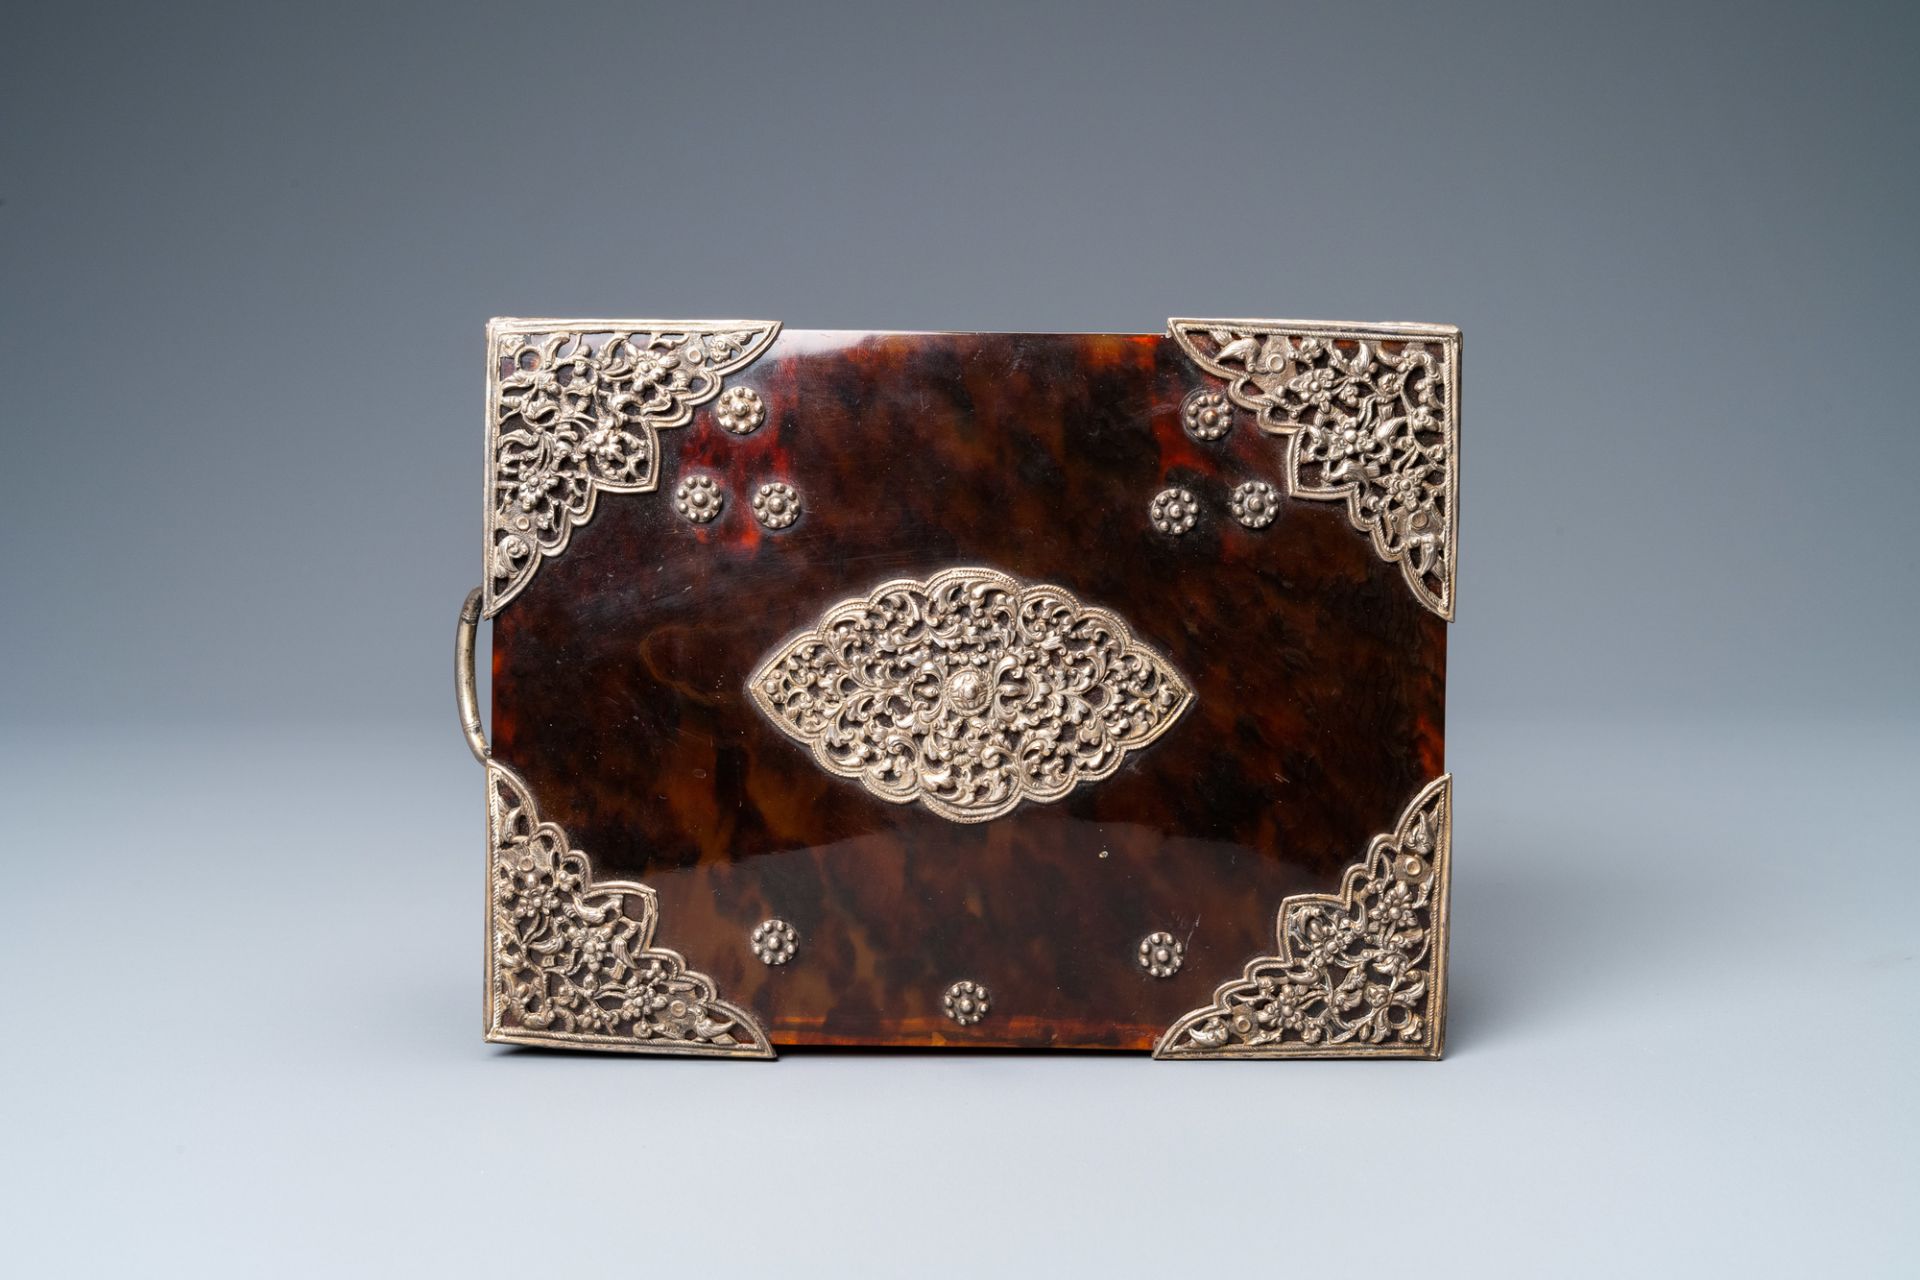 A Dutch colonial silver-mounted tortoise shell sirih casket, ca. 1700 - Image 9 of 10